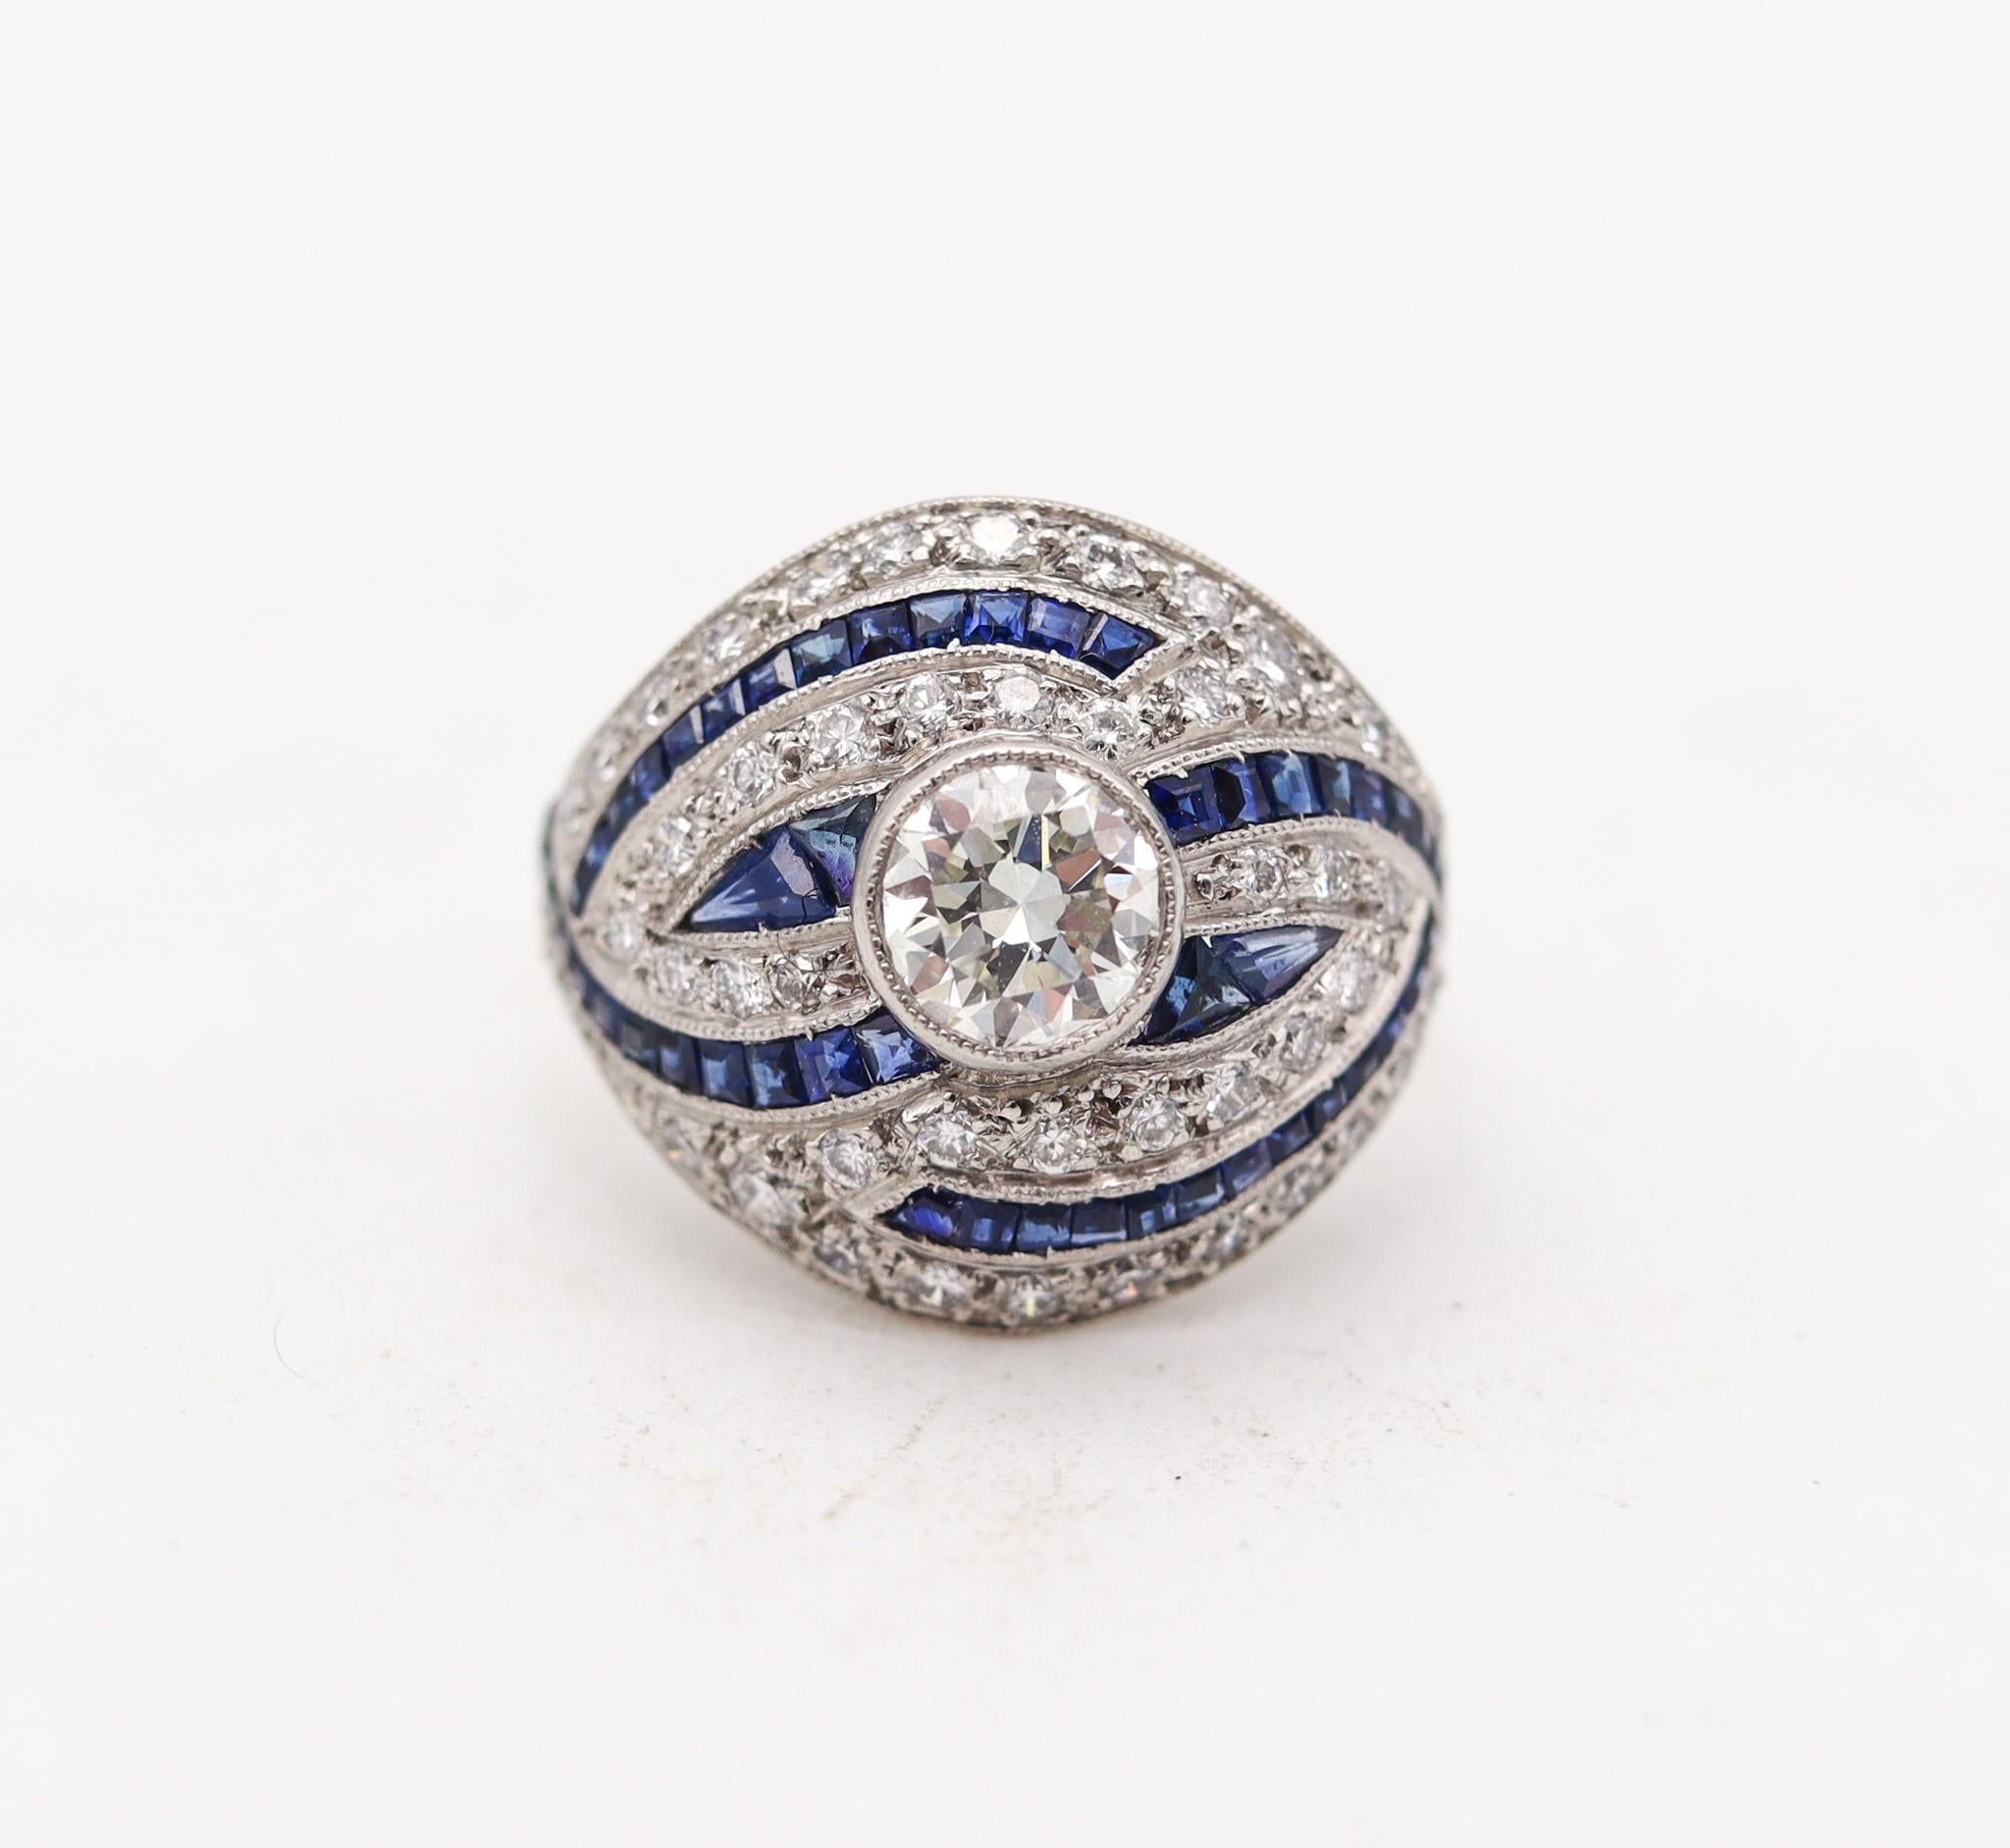 An art deco platinum cocktail ring with sapphires

Super delicate antique cocktail ring, created in America during the art deco period, back in the 1930. This beautiful ring was carefully crafted in solid platinum and mount with a great selection of